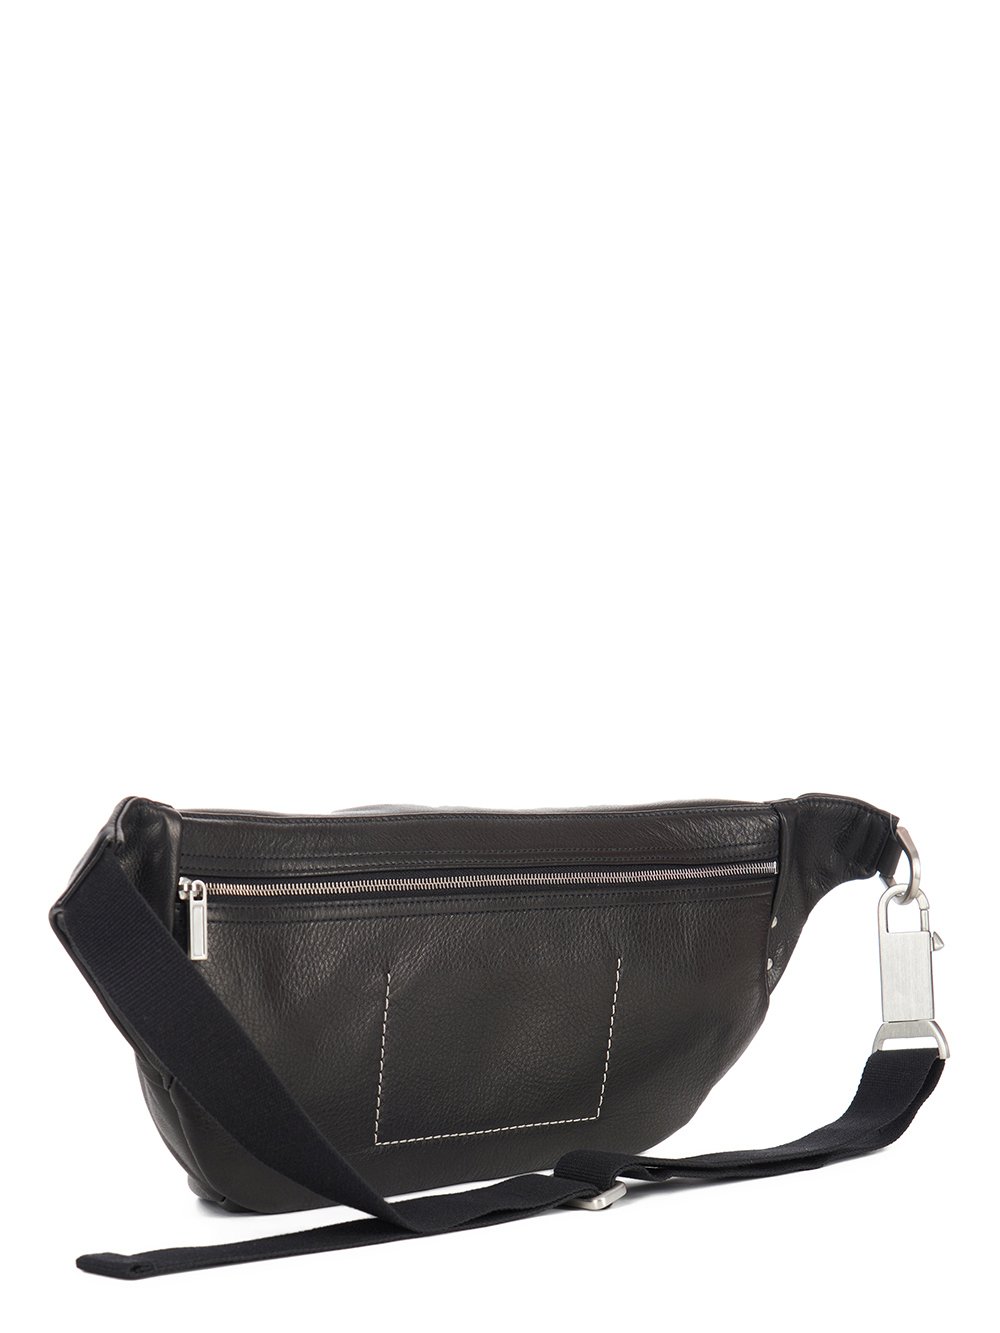 RICK OWENS FW23 LUXOR BUMBAG IN BLACK SOFT GRAIN COW LEATHER